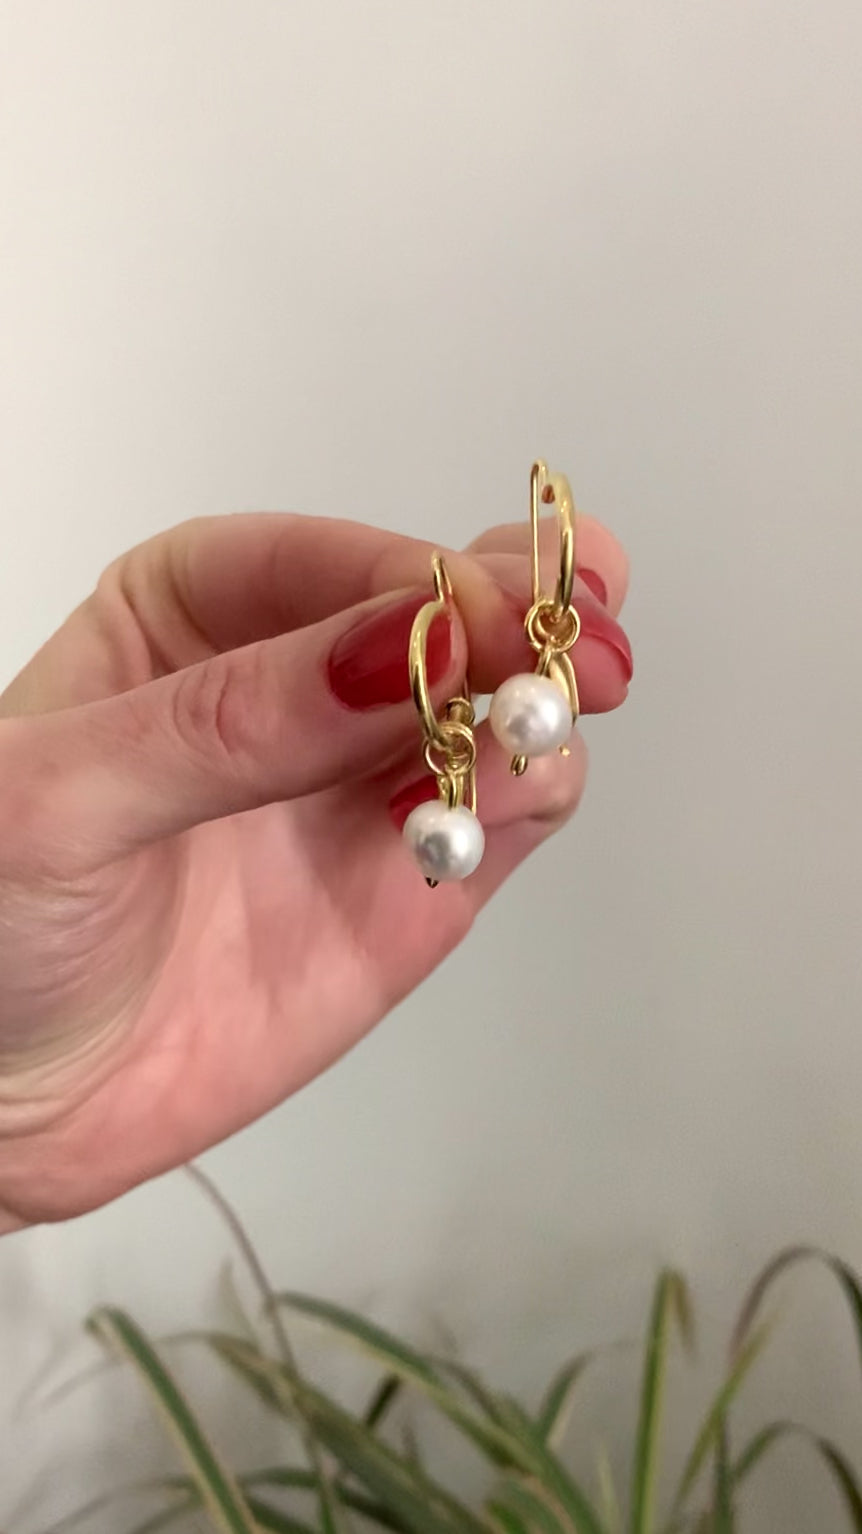  hoop earrings with charms.Sterling Silver: Crafted from high-quality 925 sterling silver. 8mm A-Grade Round Freshwater Pearl: The centre piece of these hoops, adding an element of timeless elegance.